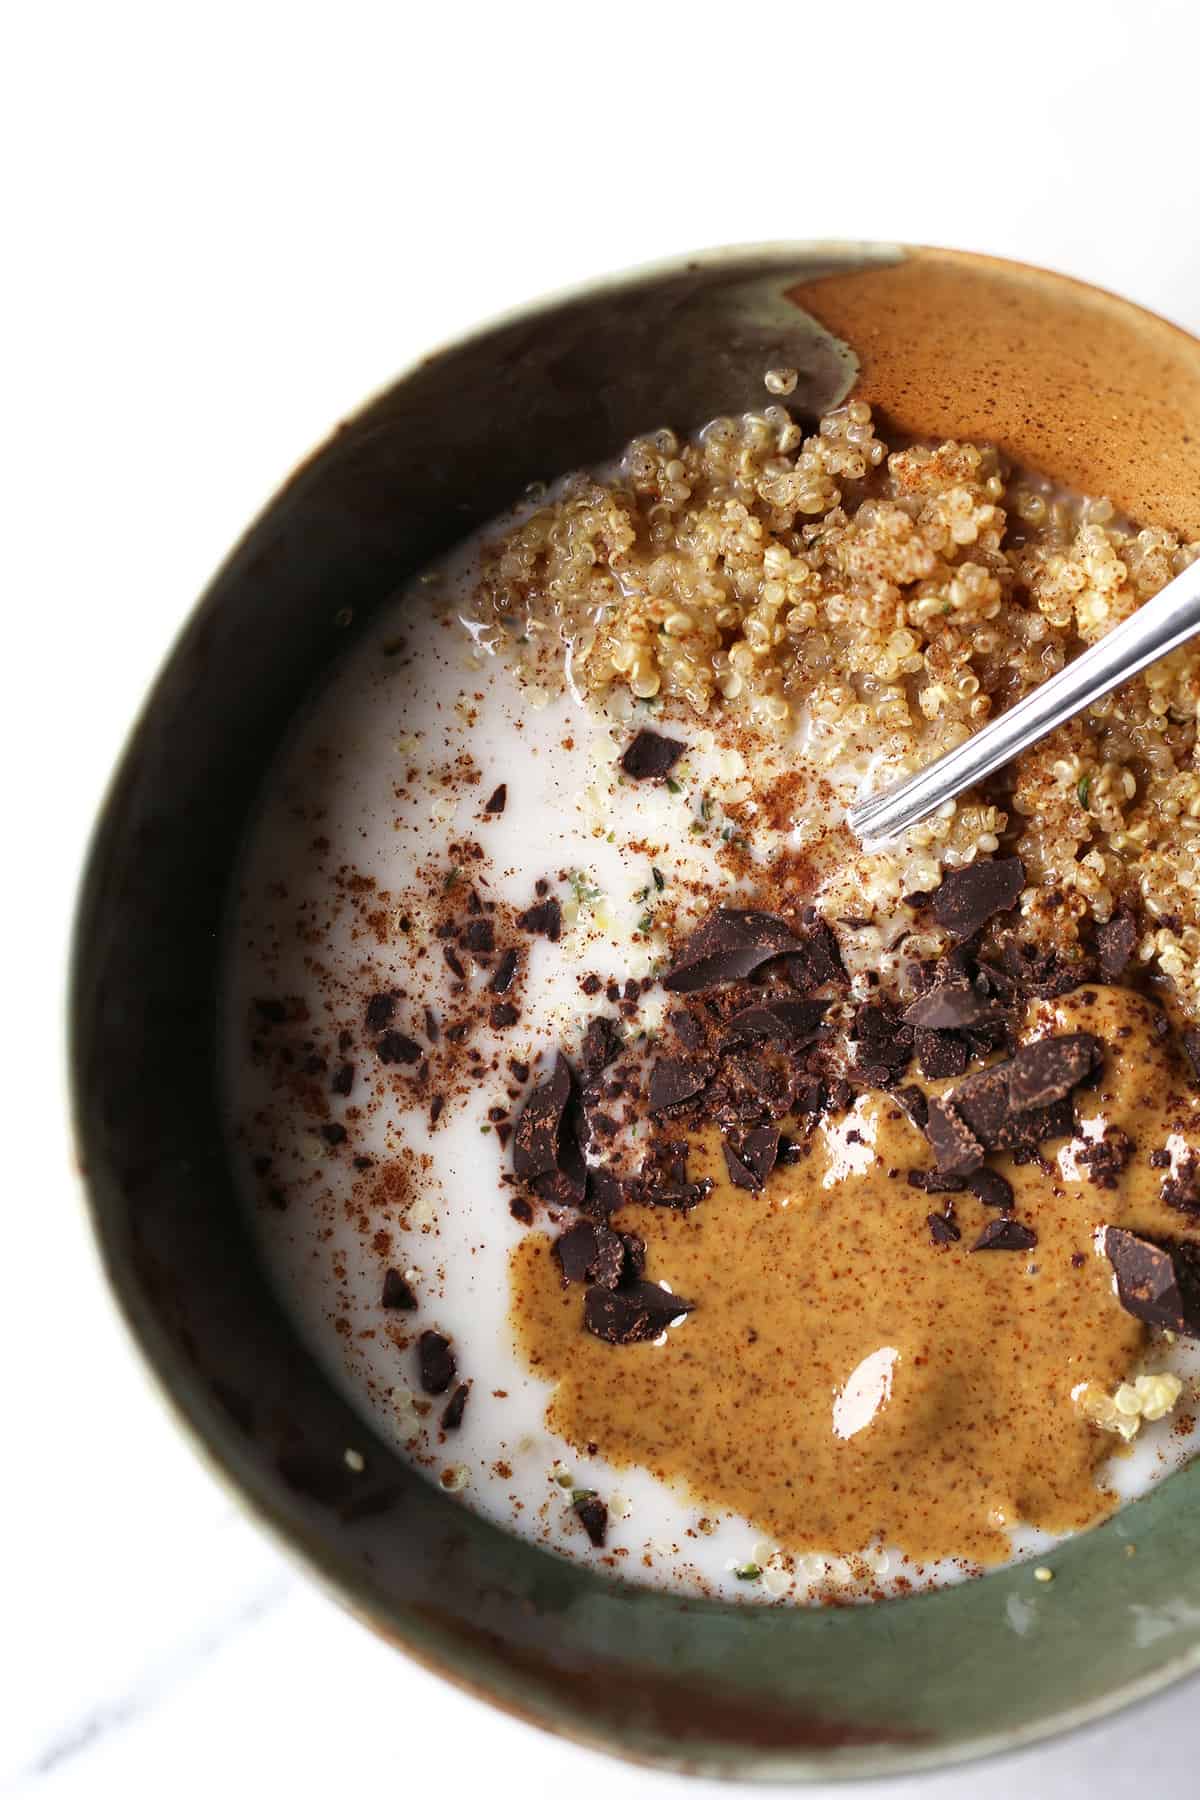 This Cinnamon Quinoa Protein Cereal Bowl is so simple to make, vegan and gluten free, healthy and packed with protein and flavor! 